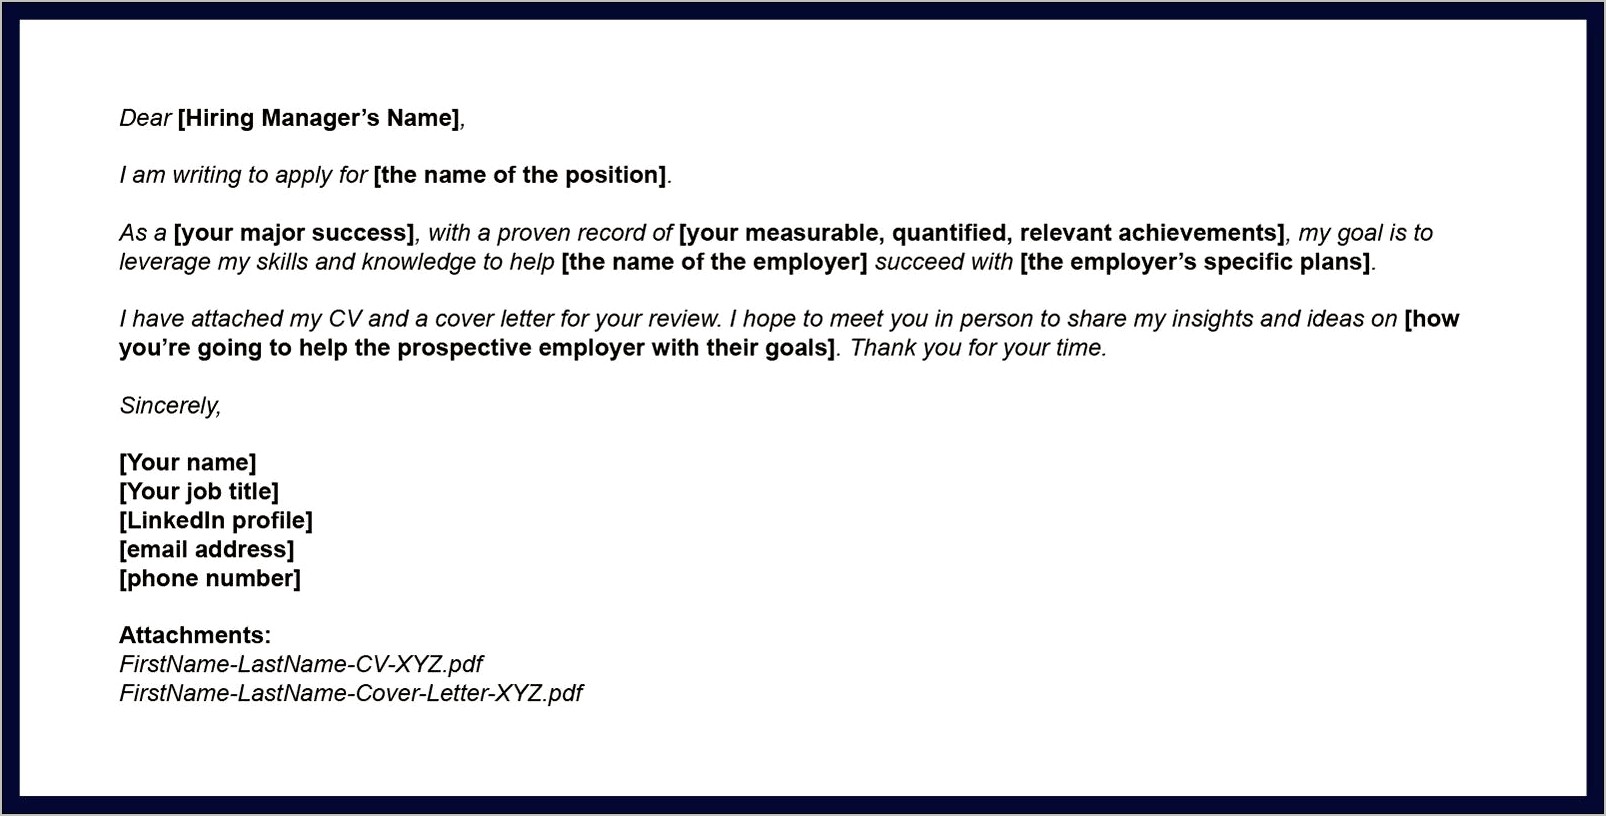 Best File Type To Submit Resume As